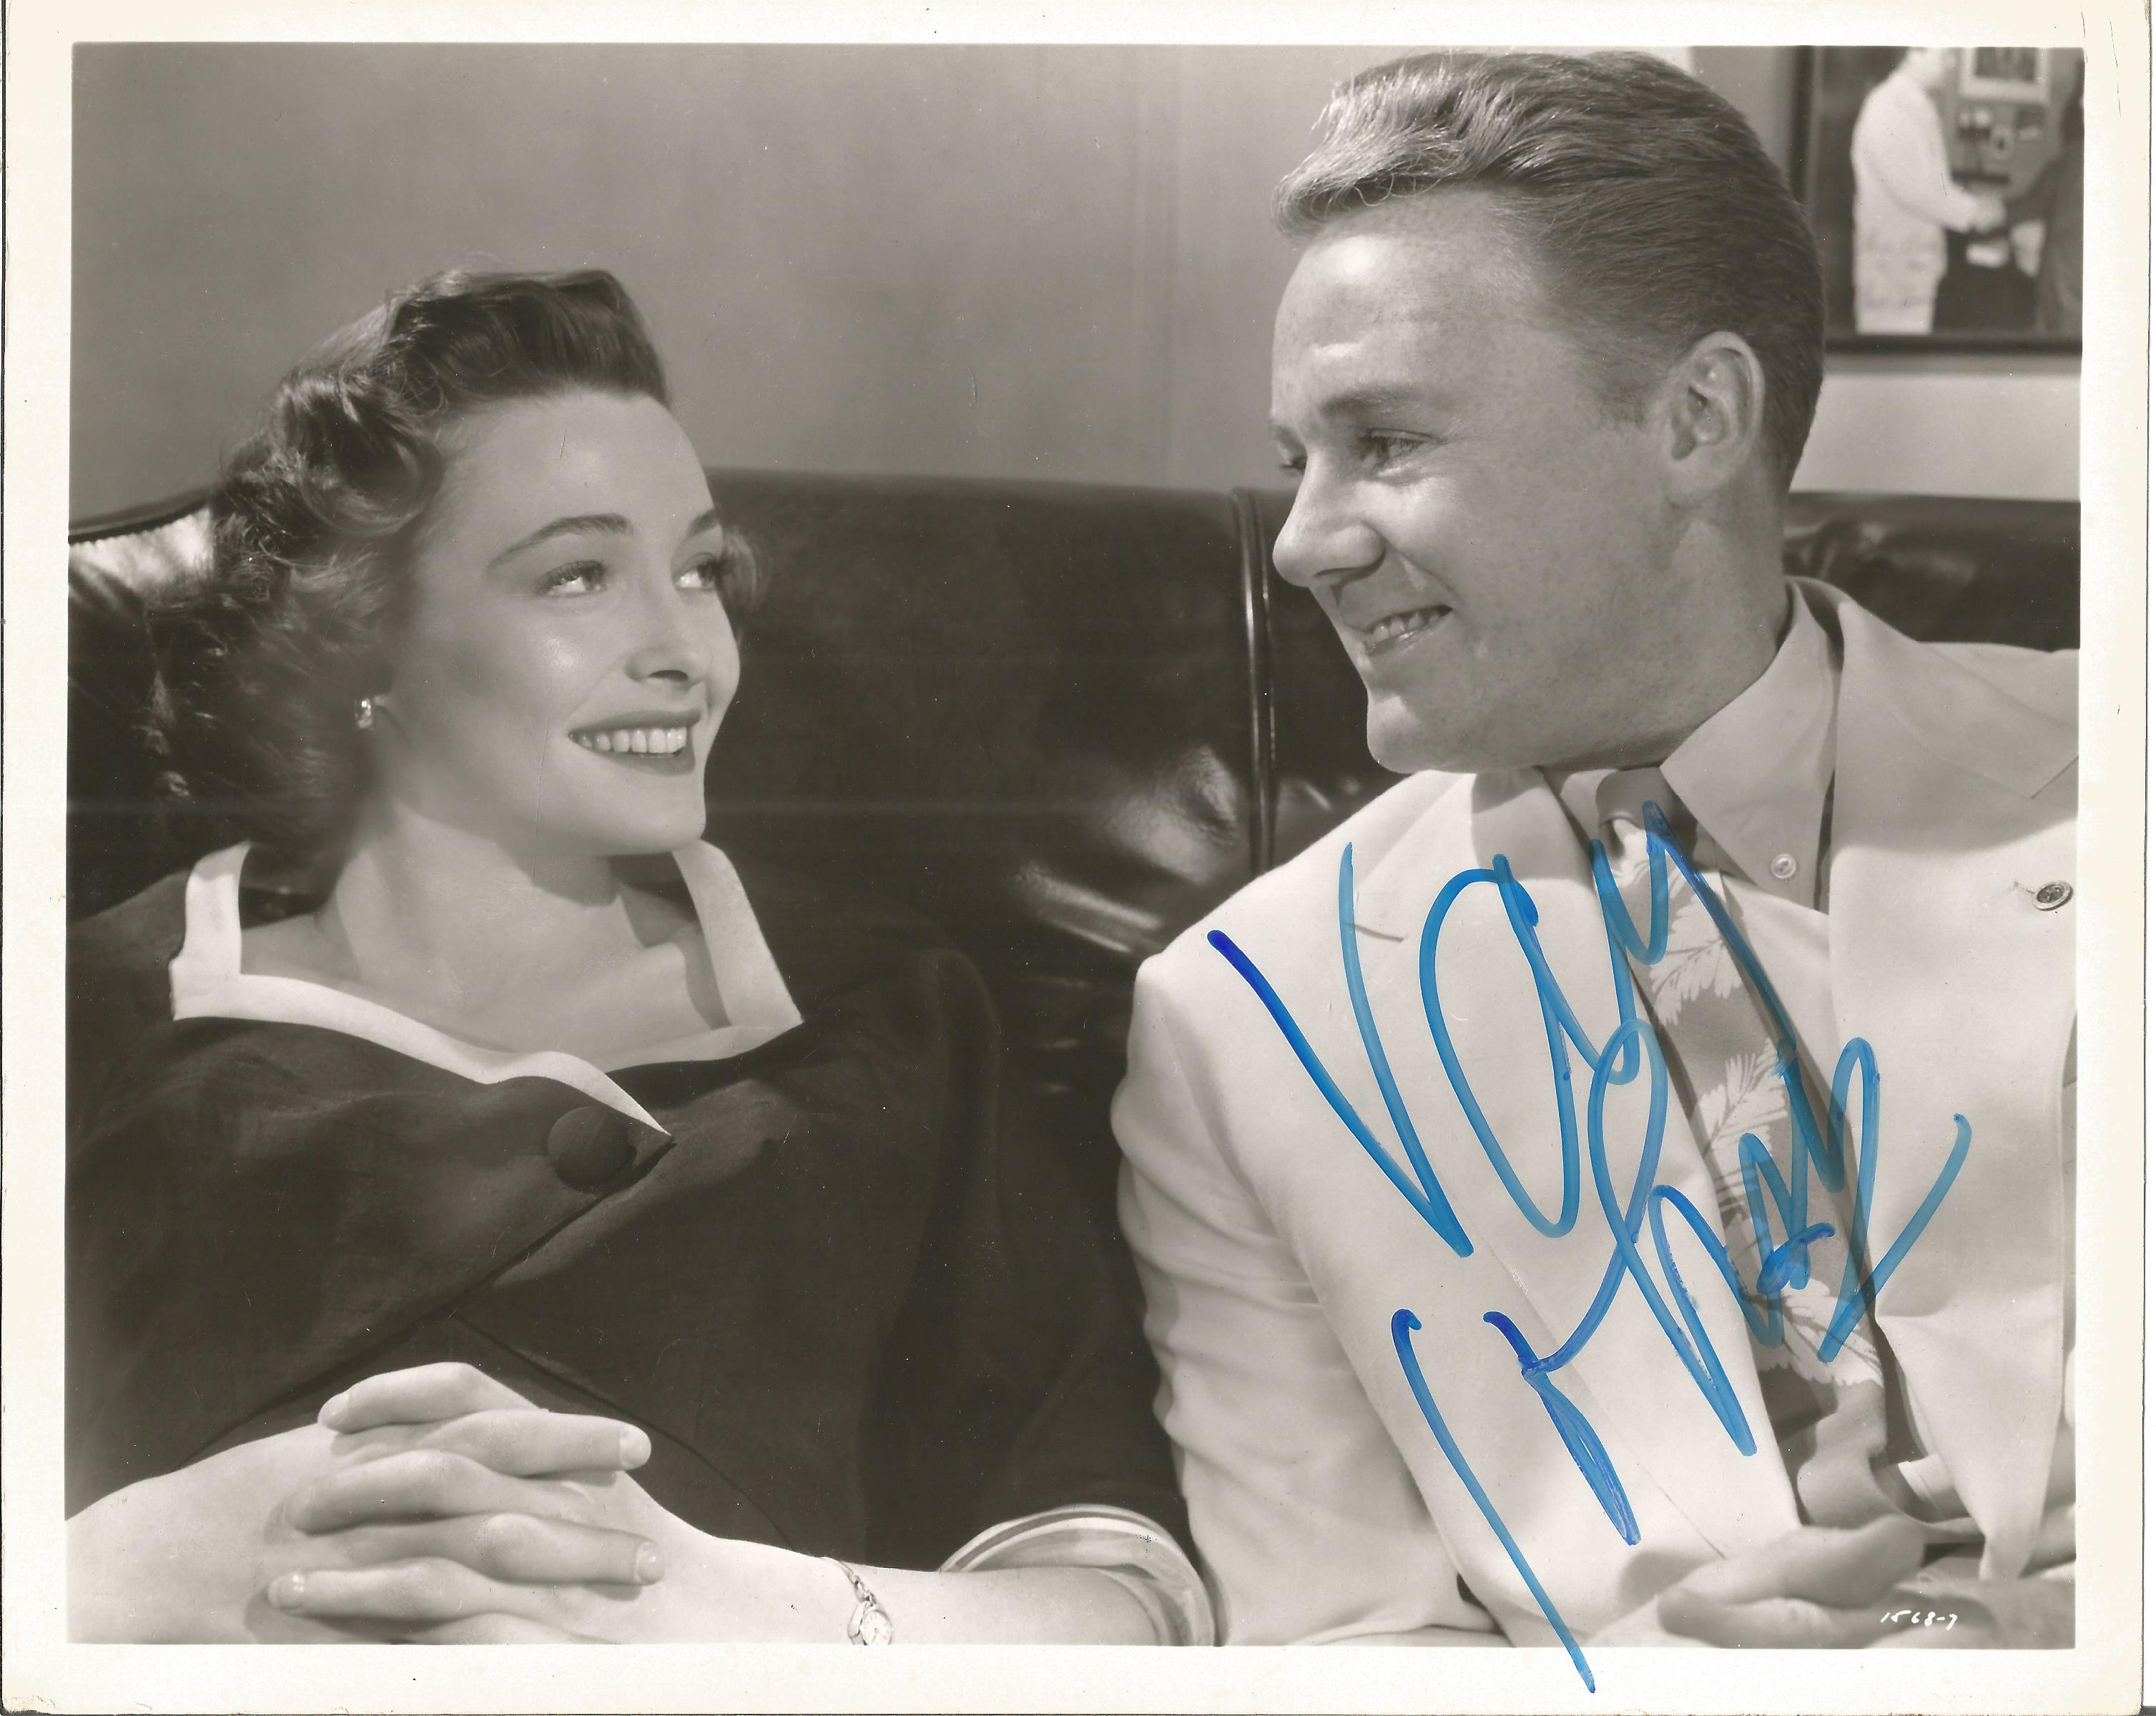 Van Johnson signed 10 x 8 inch b/w photo, slight crease in middle not distinctive. Condition 7/10.